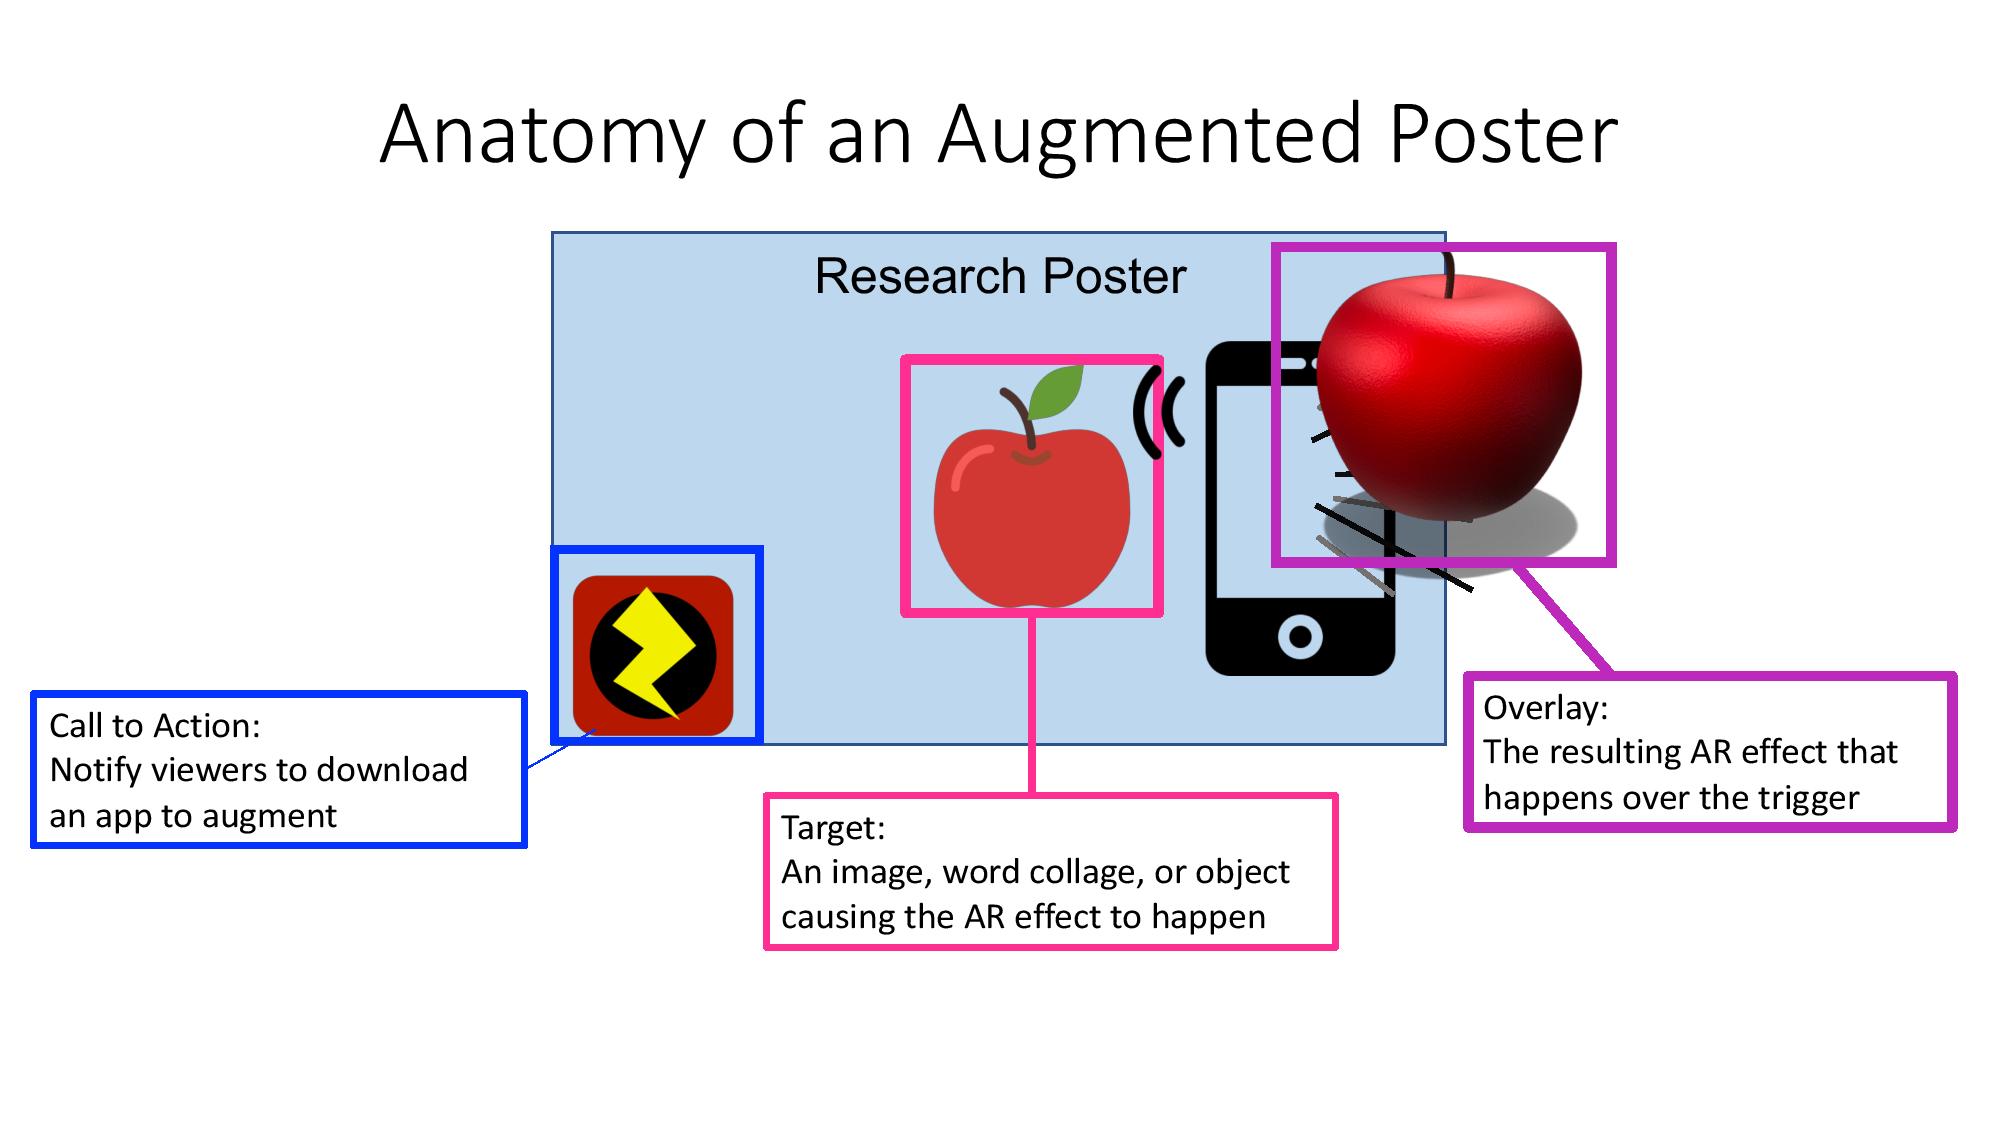 Anatomy of an Augmented Poster